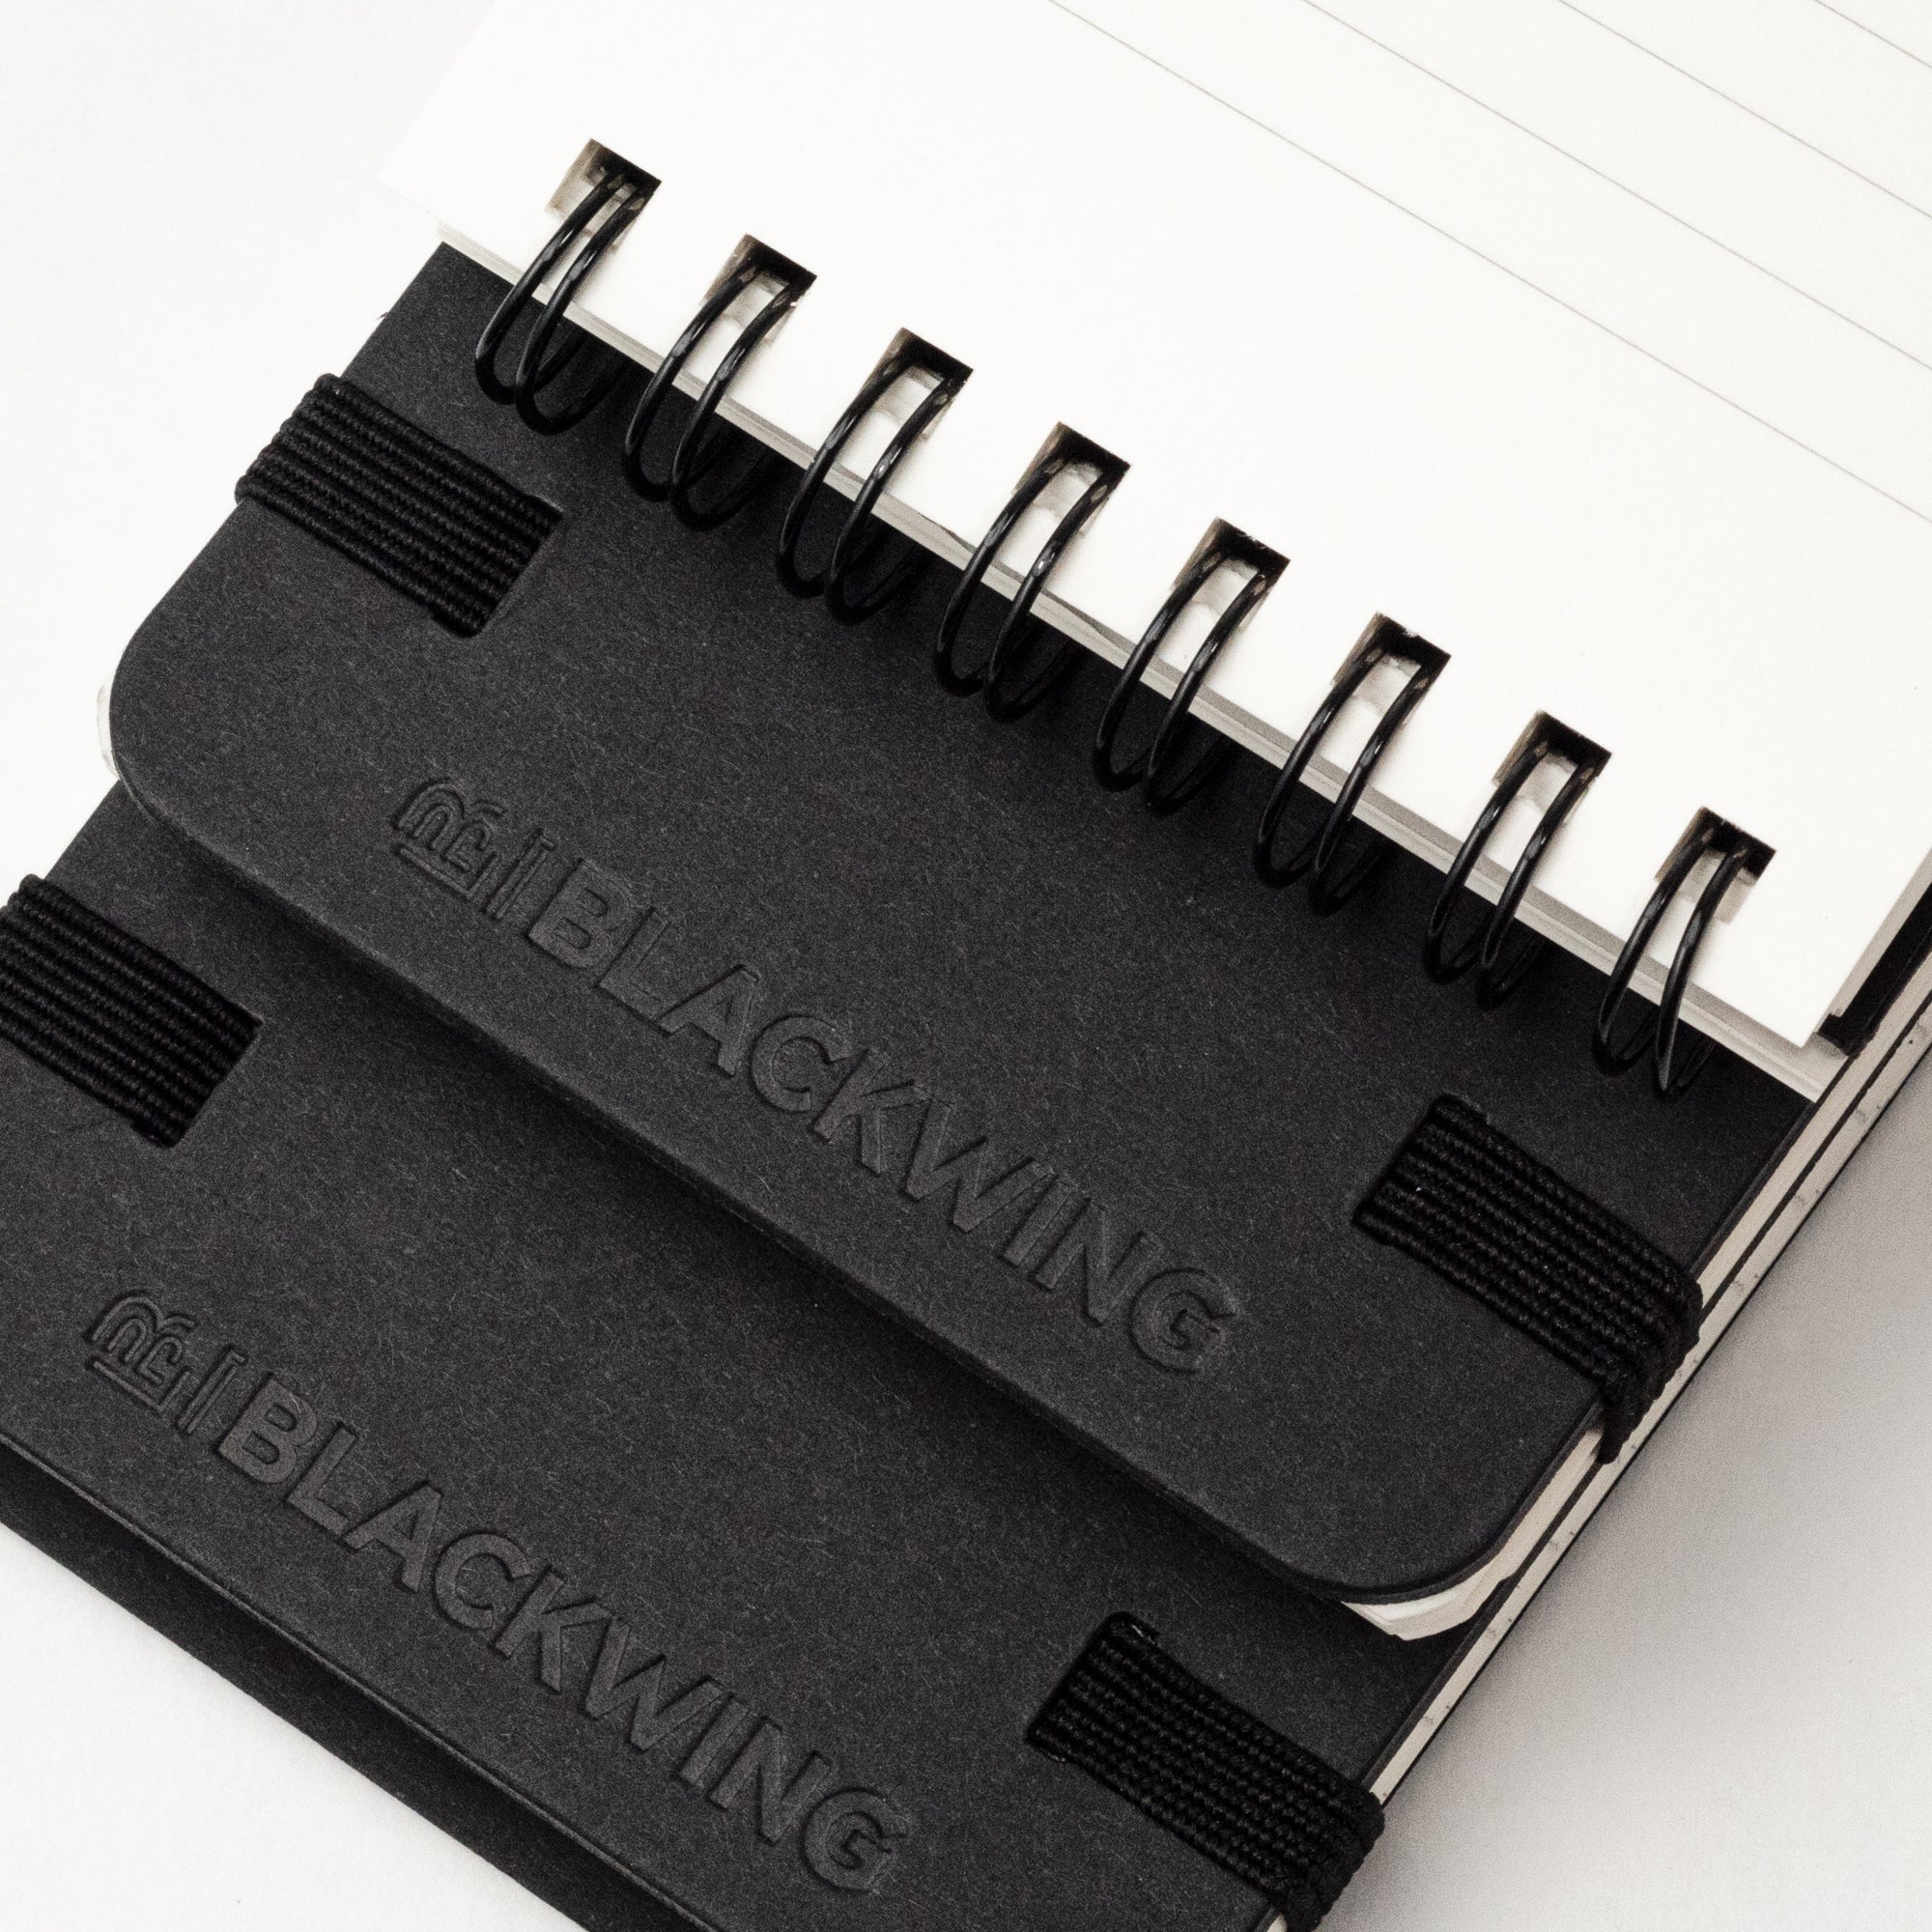 A Blackwing Reporter Pads (Set of 2) with the black king logo on it, perfect for note-taking or sketching.